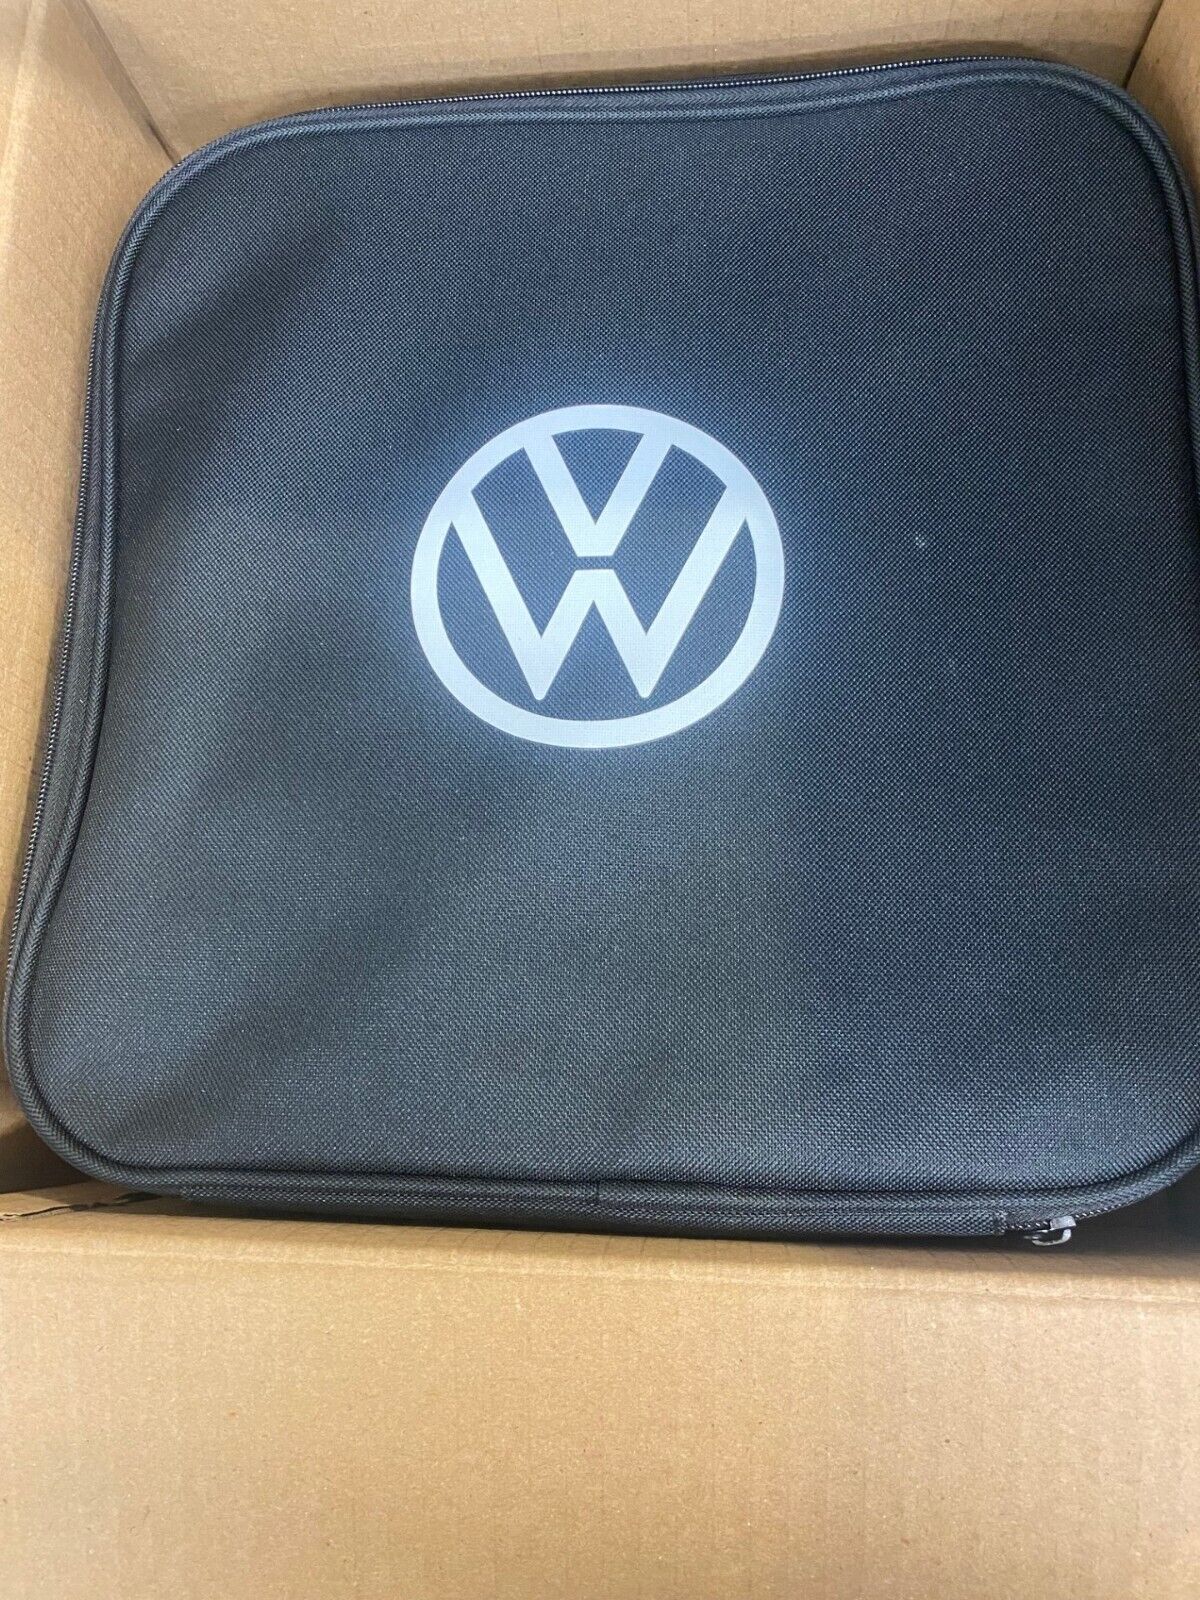 OEM ID 4 VW CHARGER 11A054410